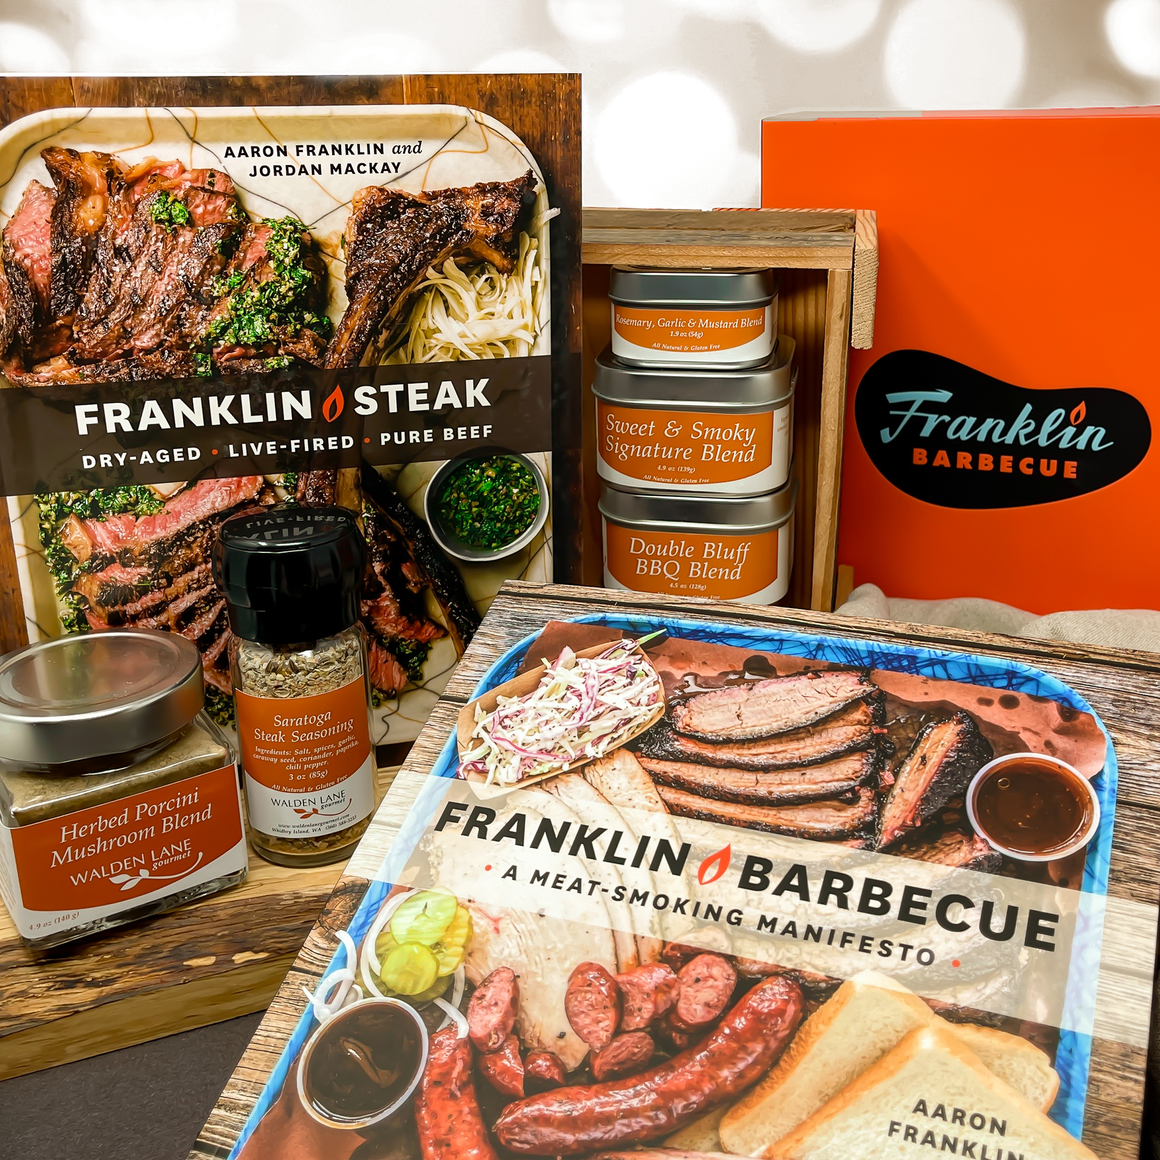 Franklin Barbecue & Franklin Steak by Franklin & Mackay Boxed Gift Set